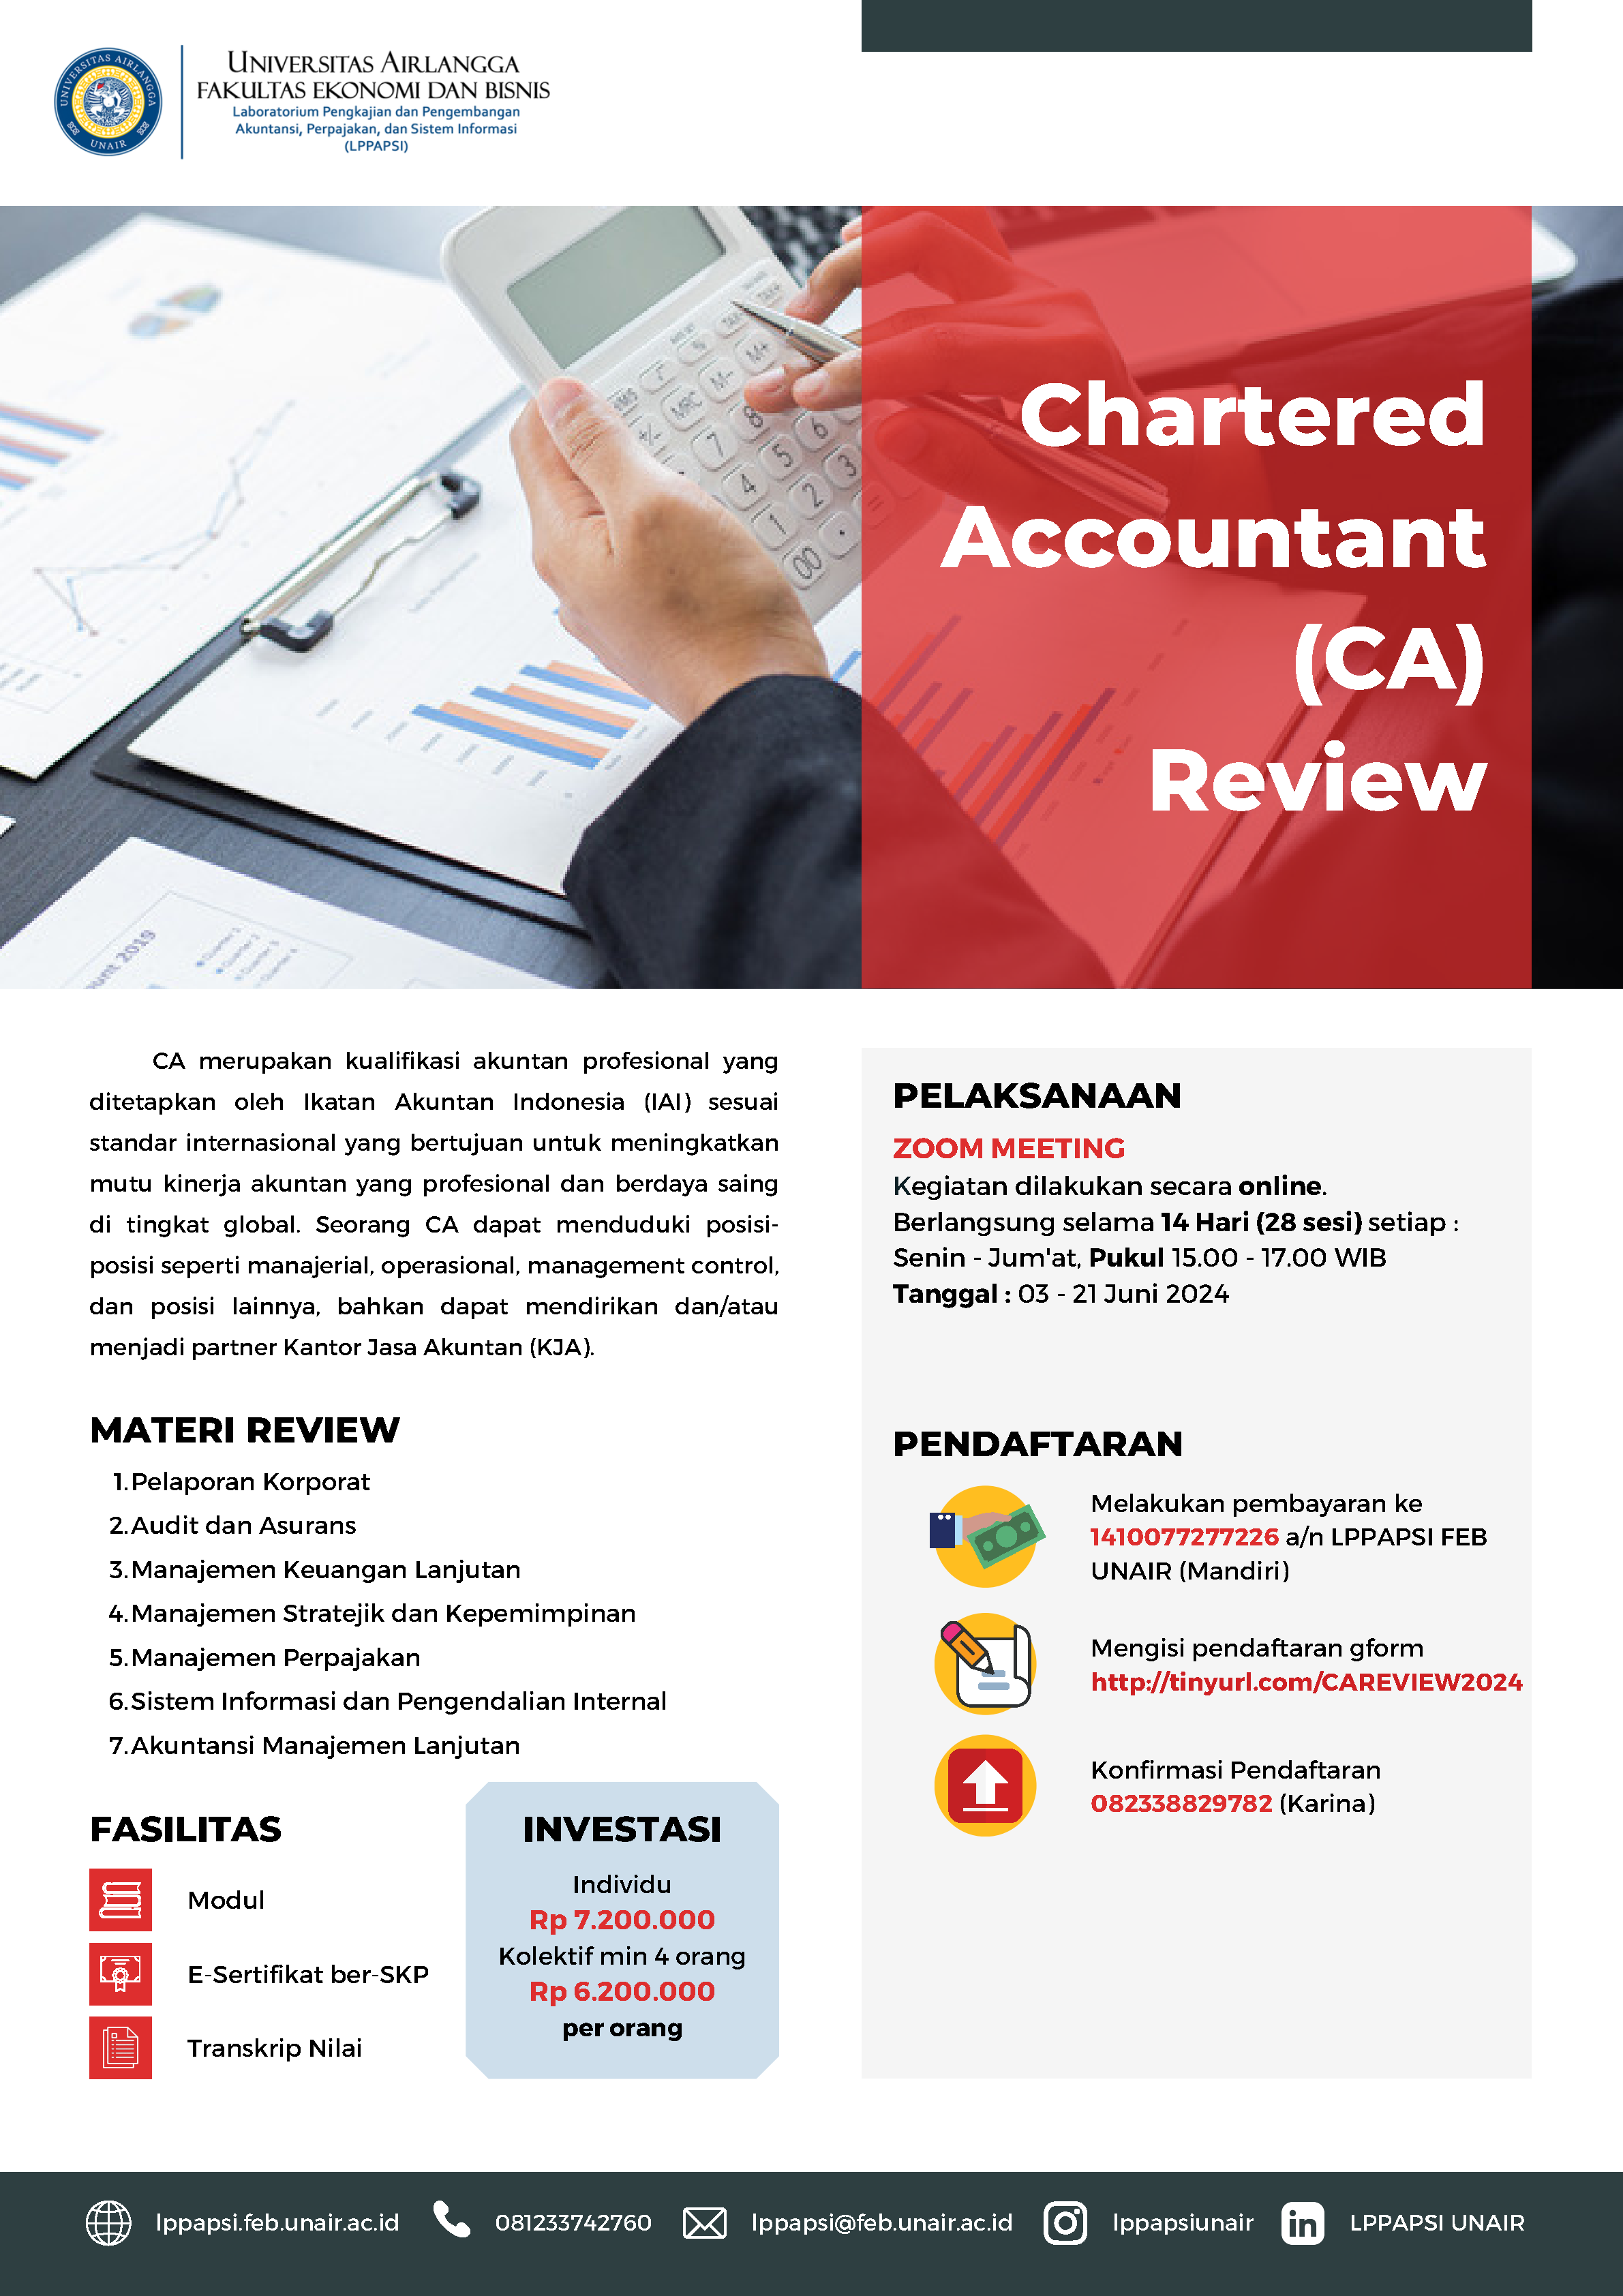 Chartered Accountant (CA) Review